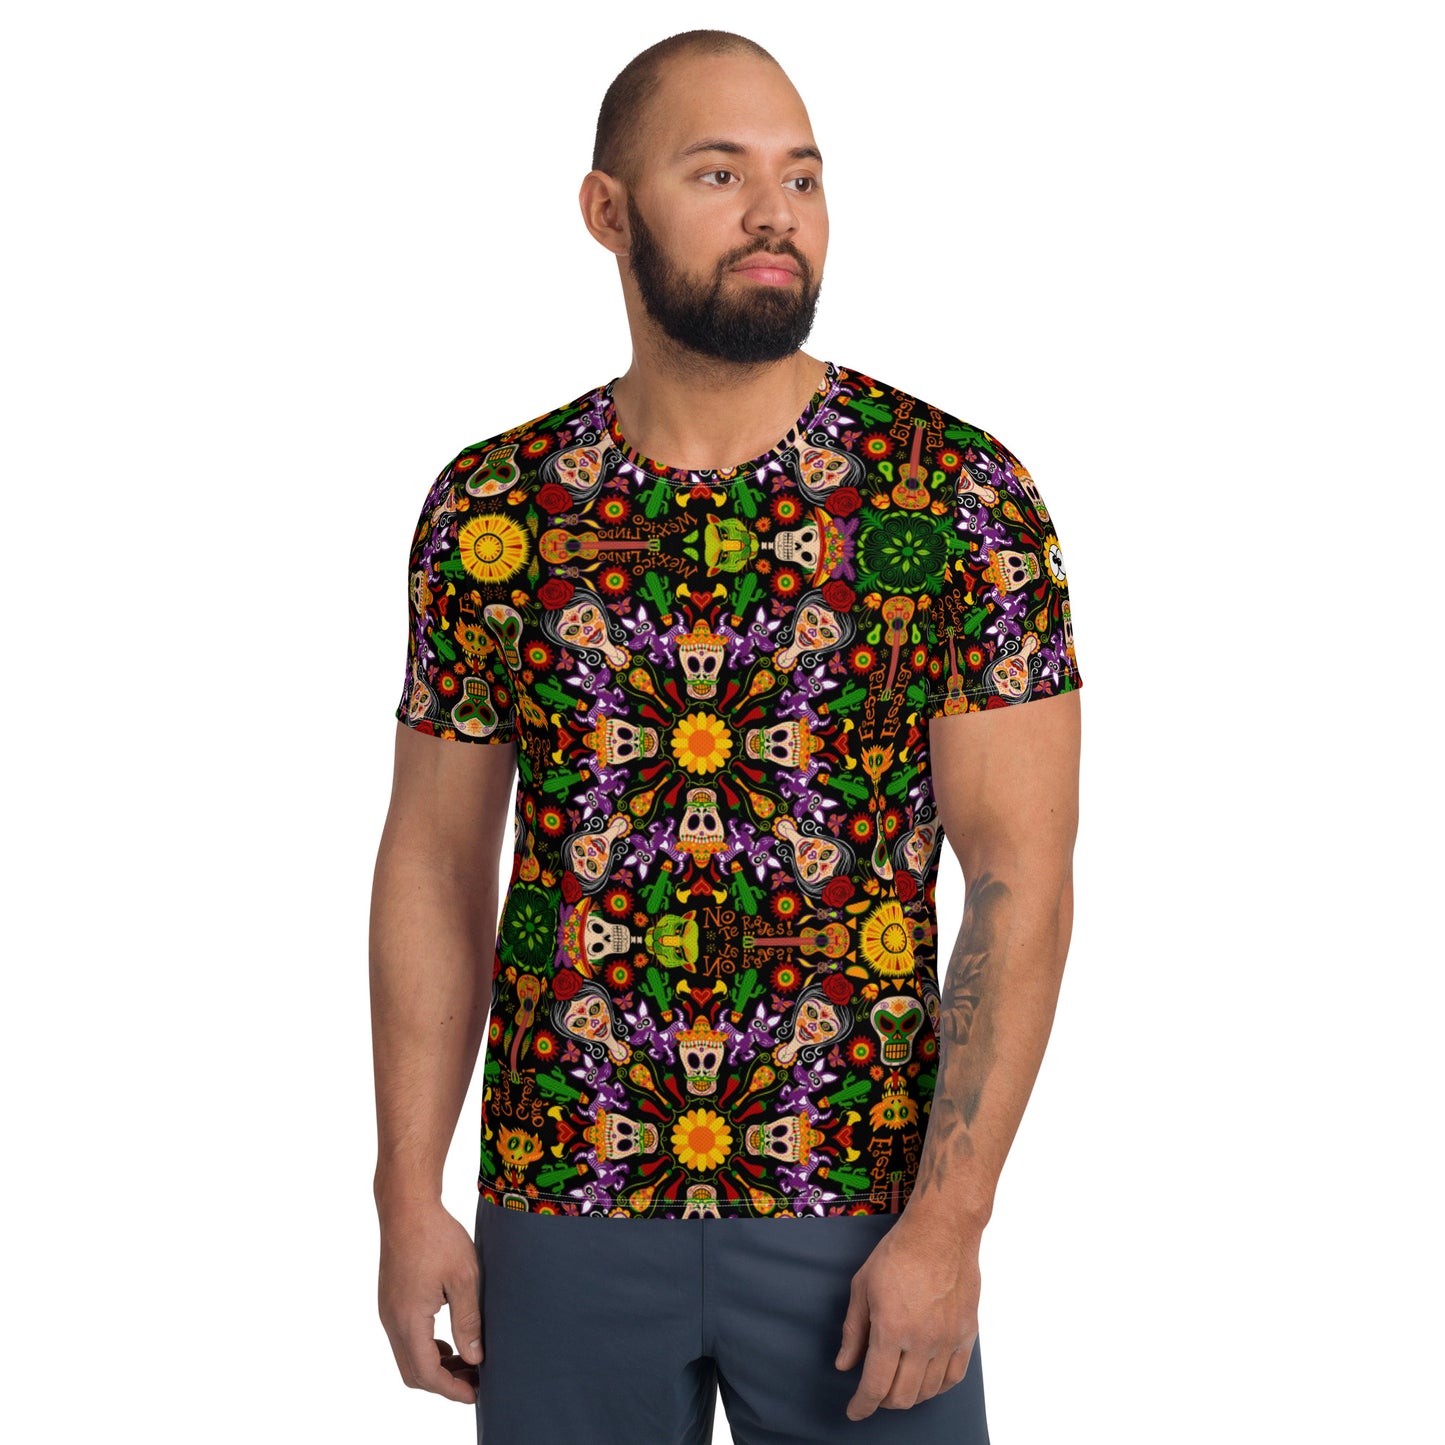 Mexican skulls celebrating the Day of the dead All-Over Print Men's Athletic T-shirt. Front view